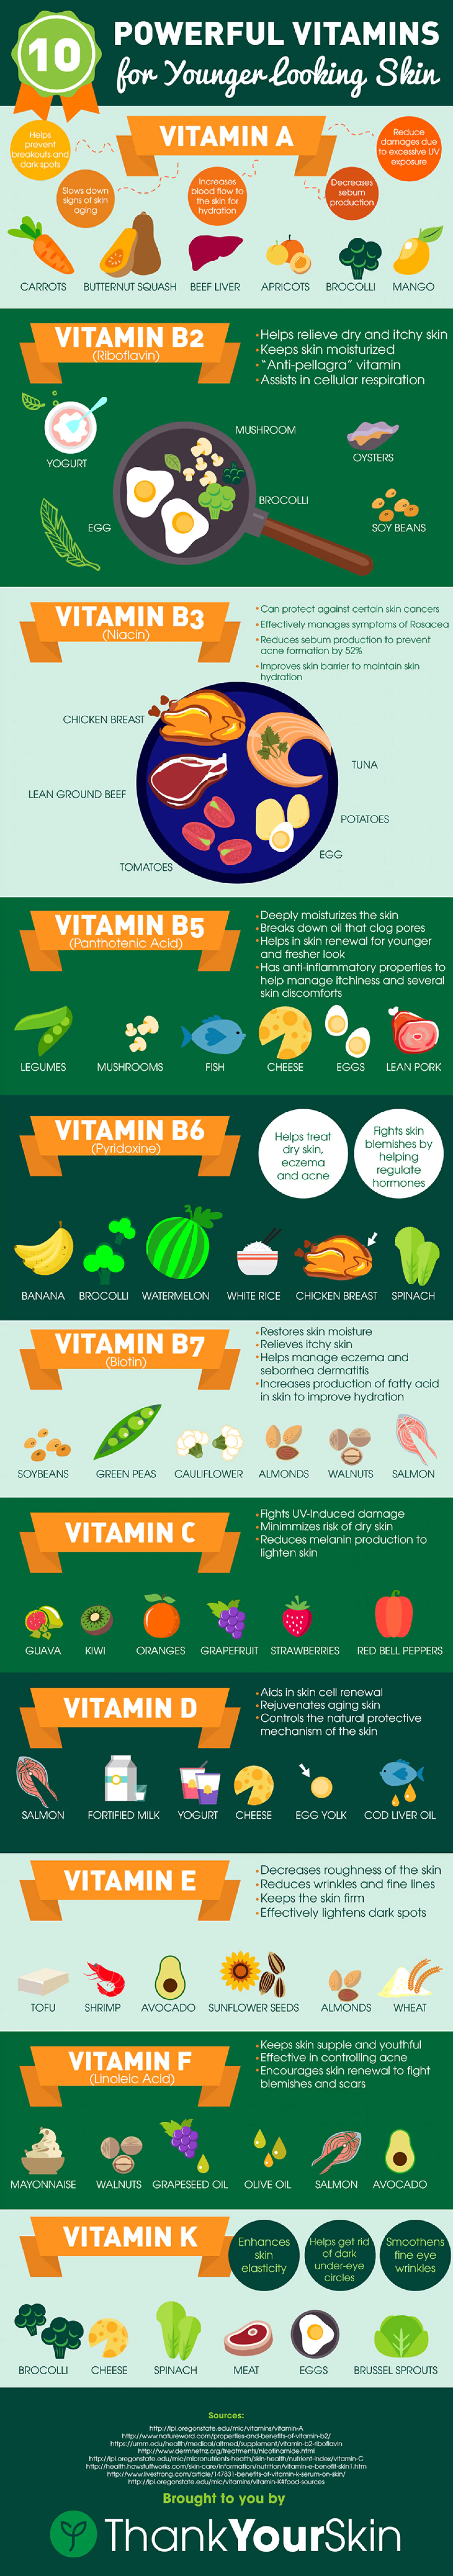 10 Powerful Vitamins for Younger Looking Skin